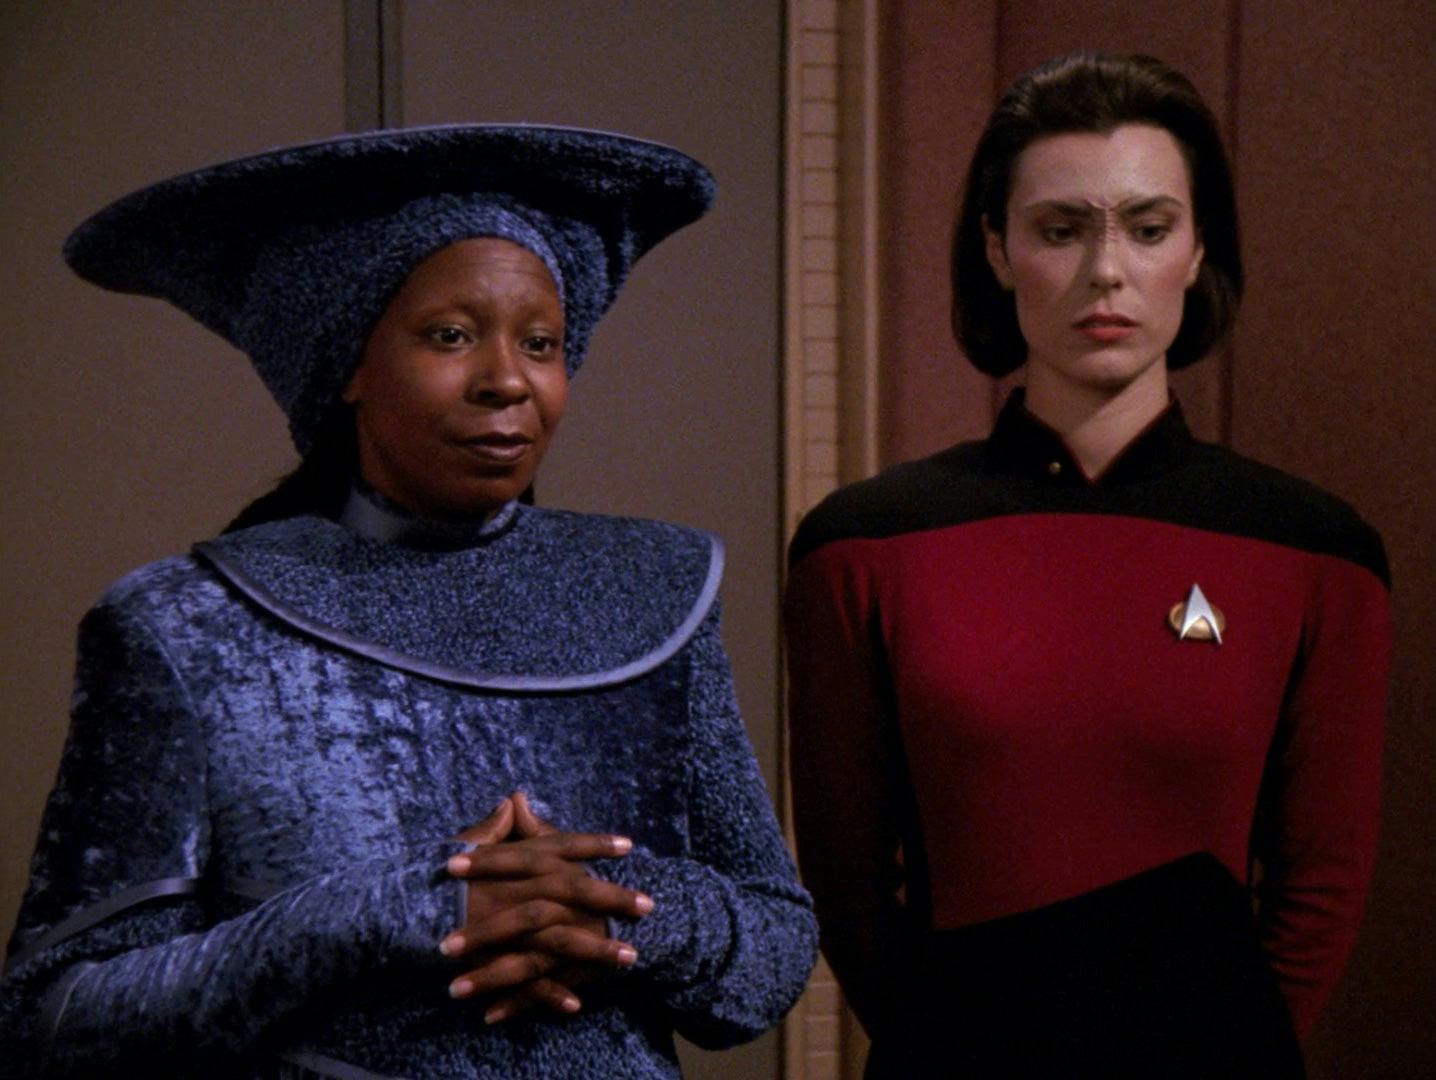 Guinan and Ro Laren stand side-by-side in Captain Picard's ready room in Star Trek: The Next Generation